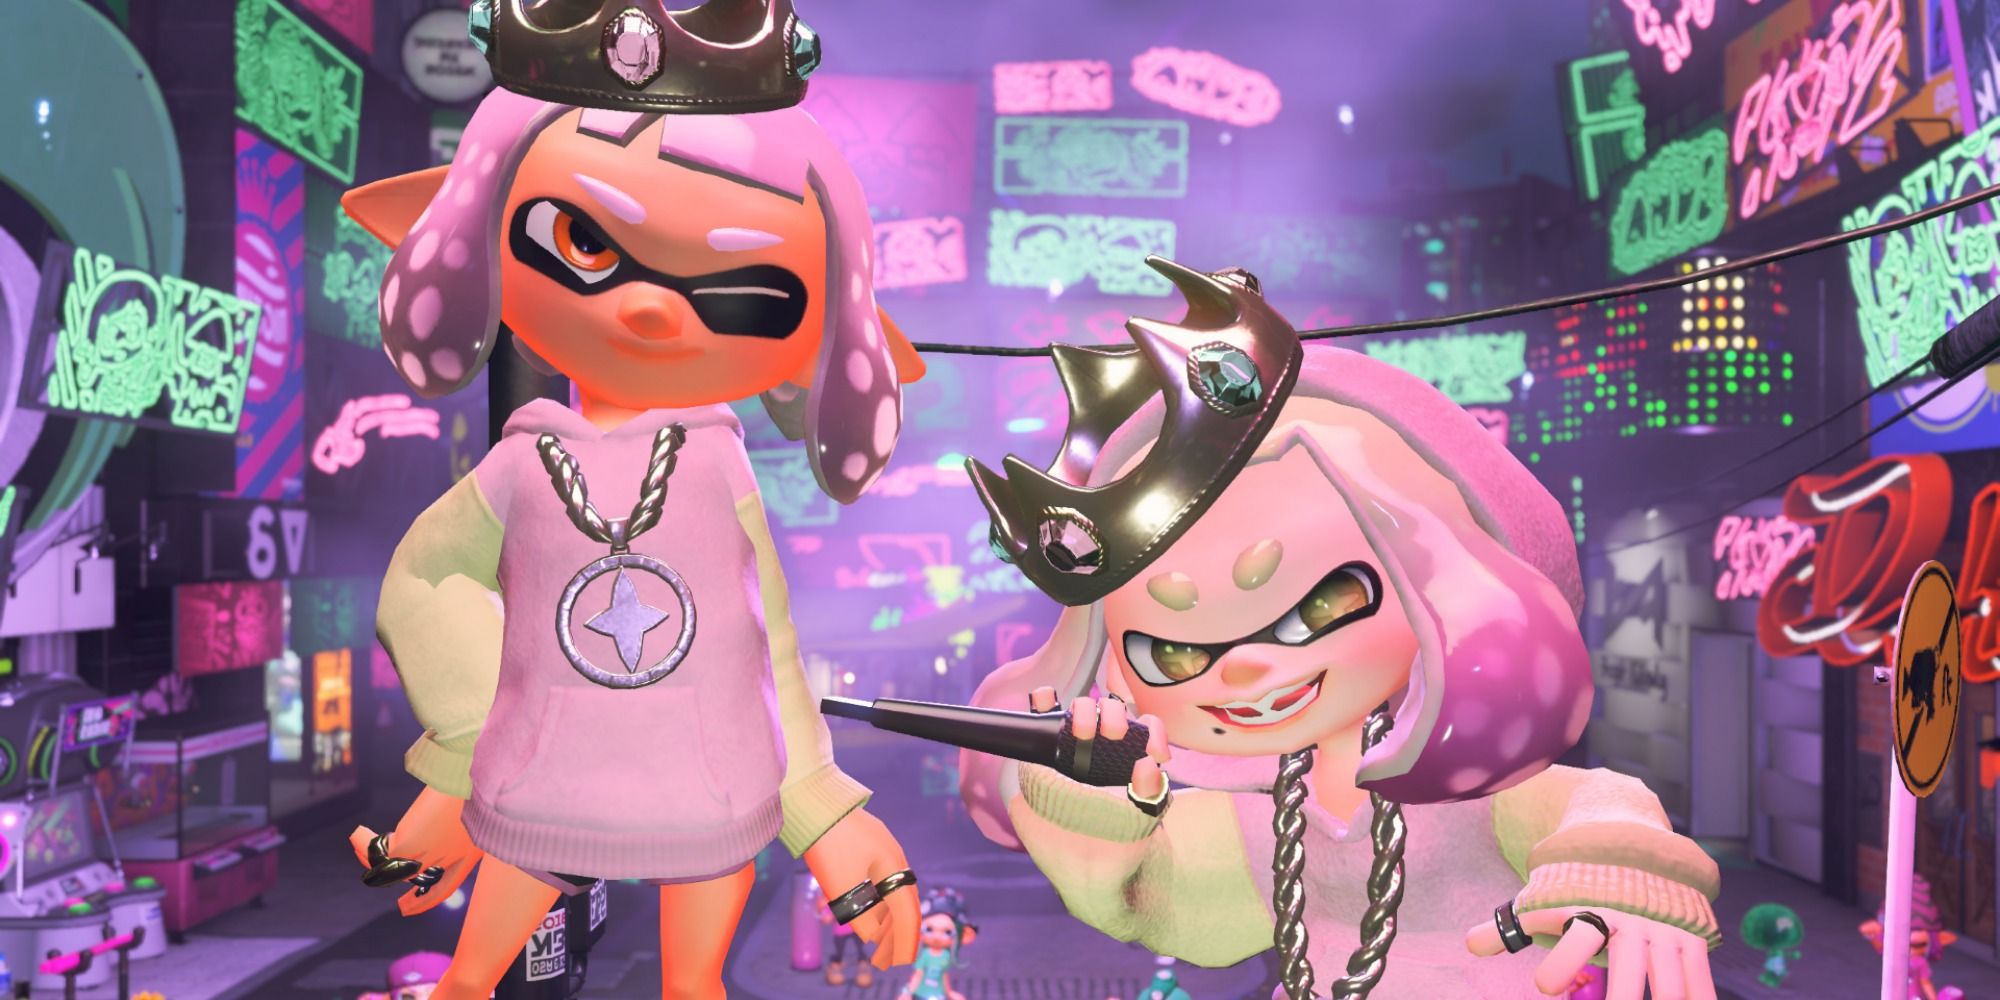 Pink-haired Inkling stands next to Pearl, both earing the Pearlescent Hoodie in a club